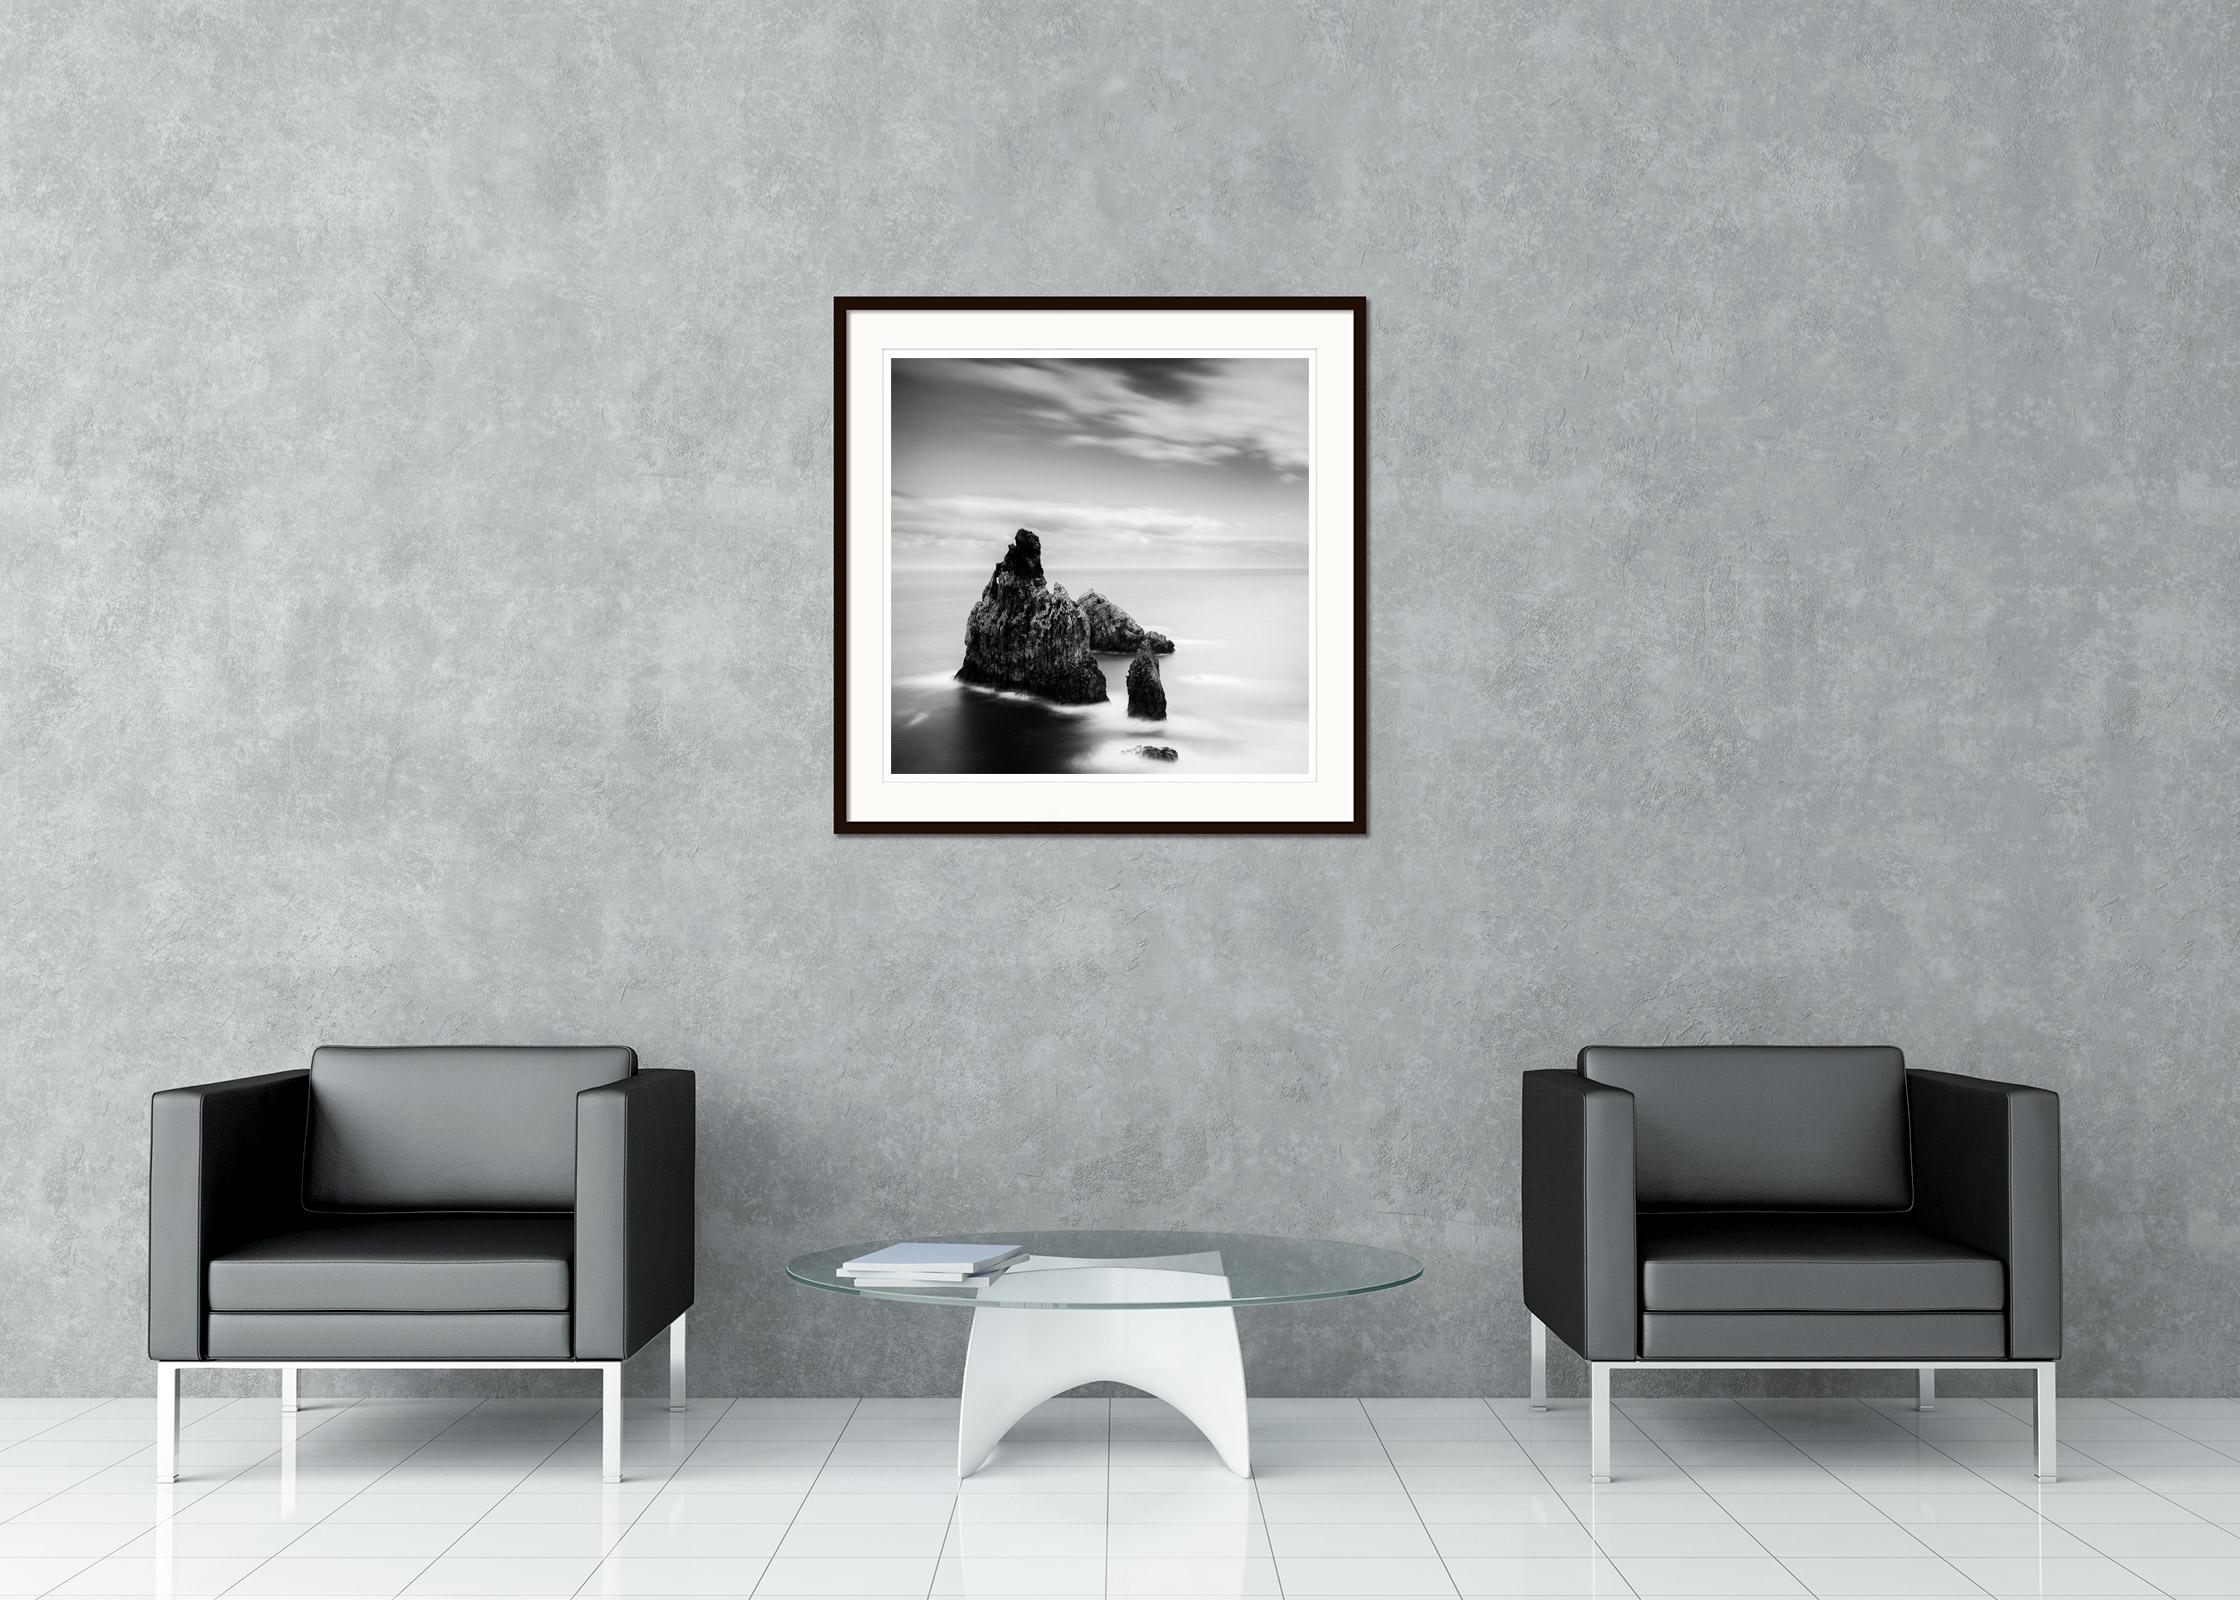 Black and White Fine Art landscape photography. Volcanic rocks in the sea at a beautiful bay on the island of madeira, Portugal. Archival pigment ink print, edition of 7. Signed, titled, dated and numbered by artist. Certificate of authenticity